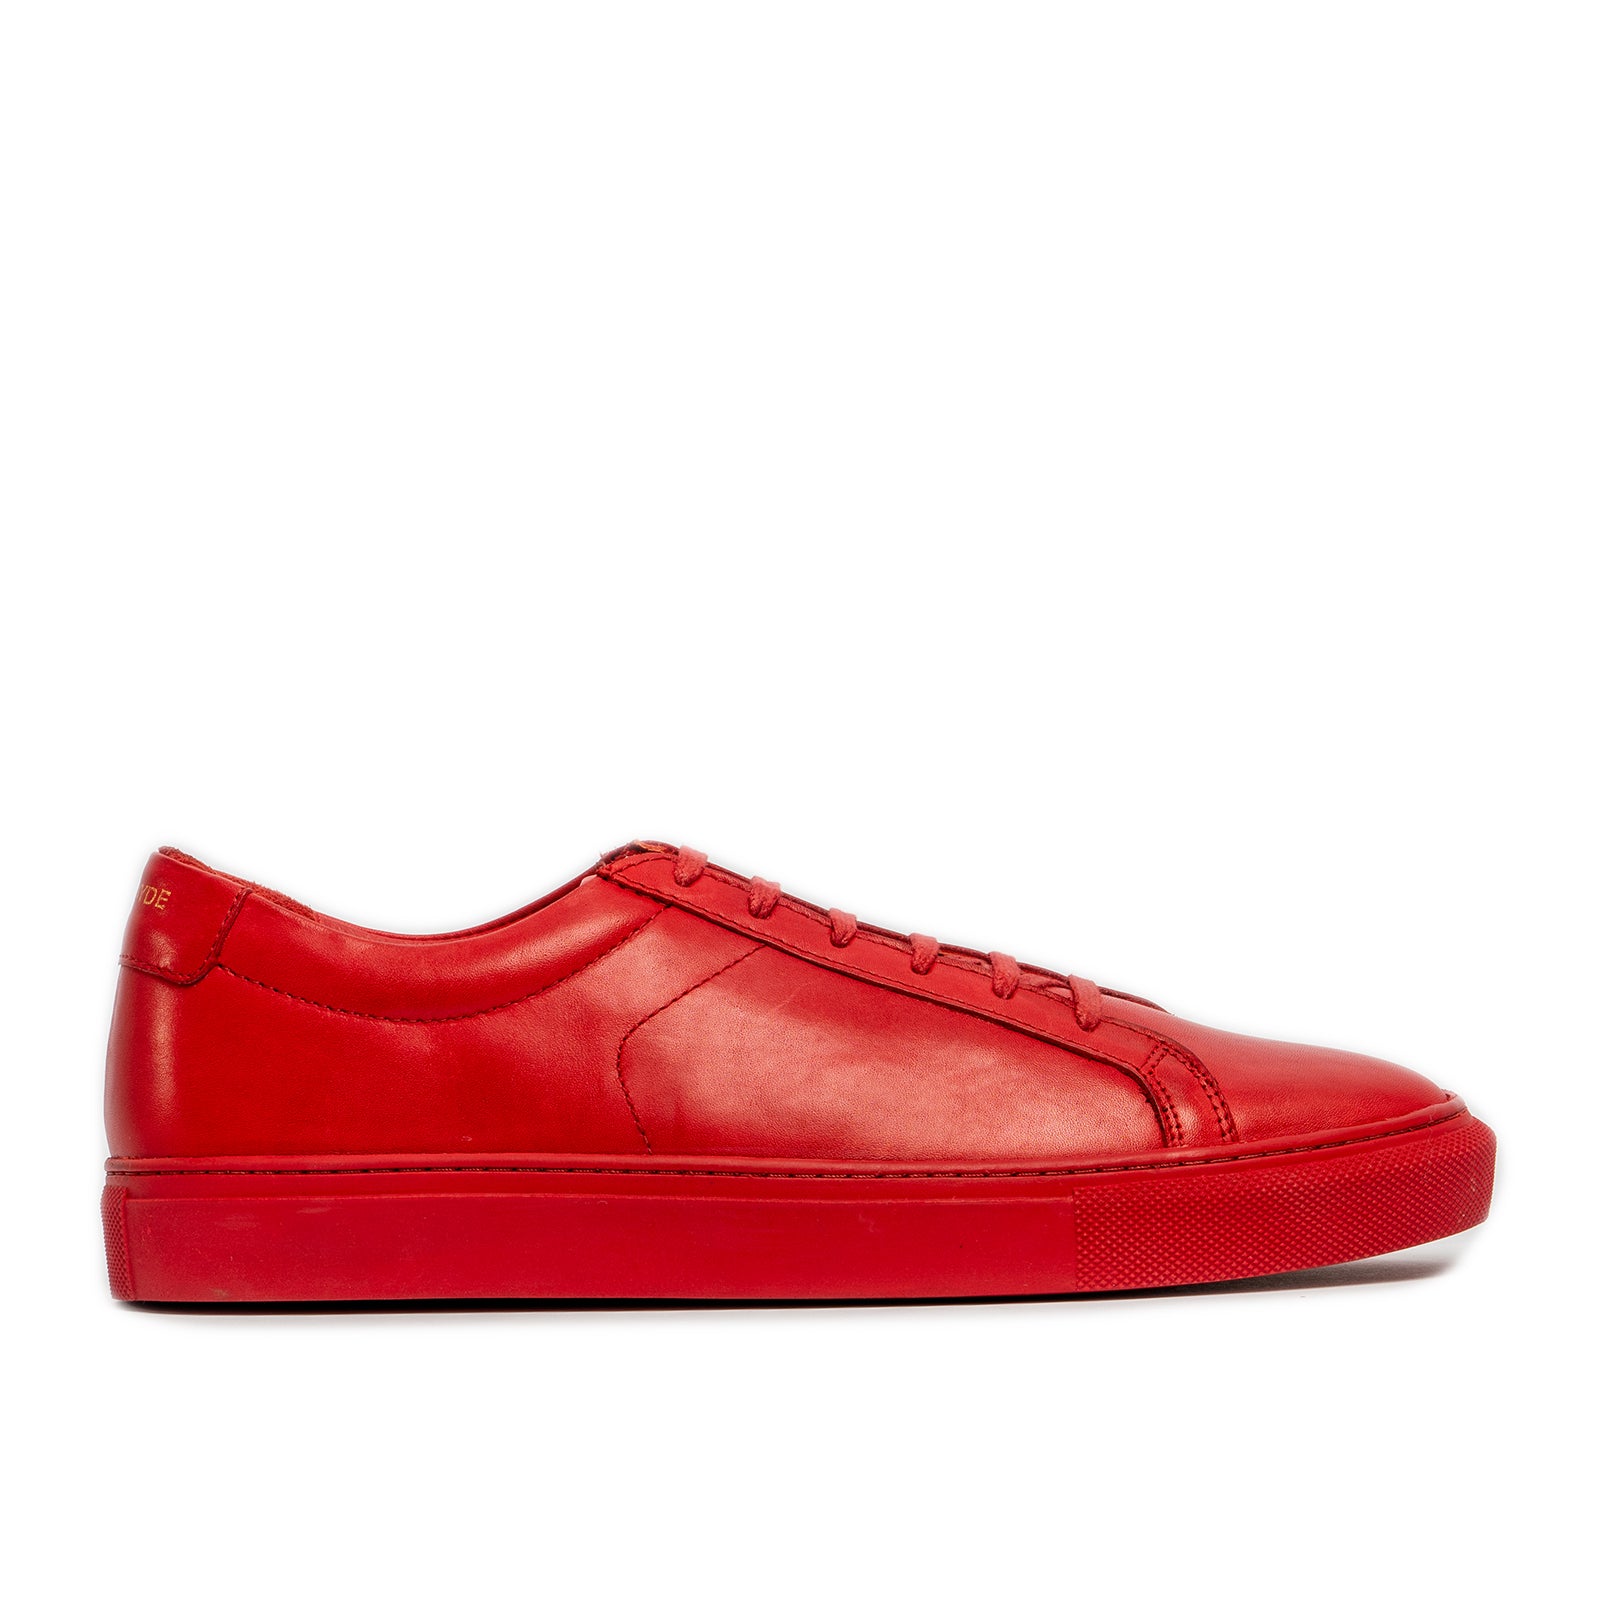 Men's red leather trainers with red sole